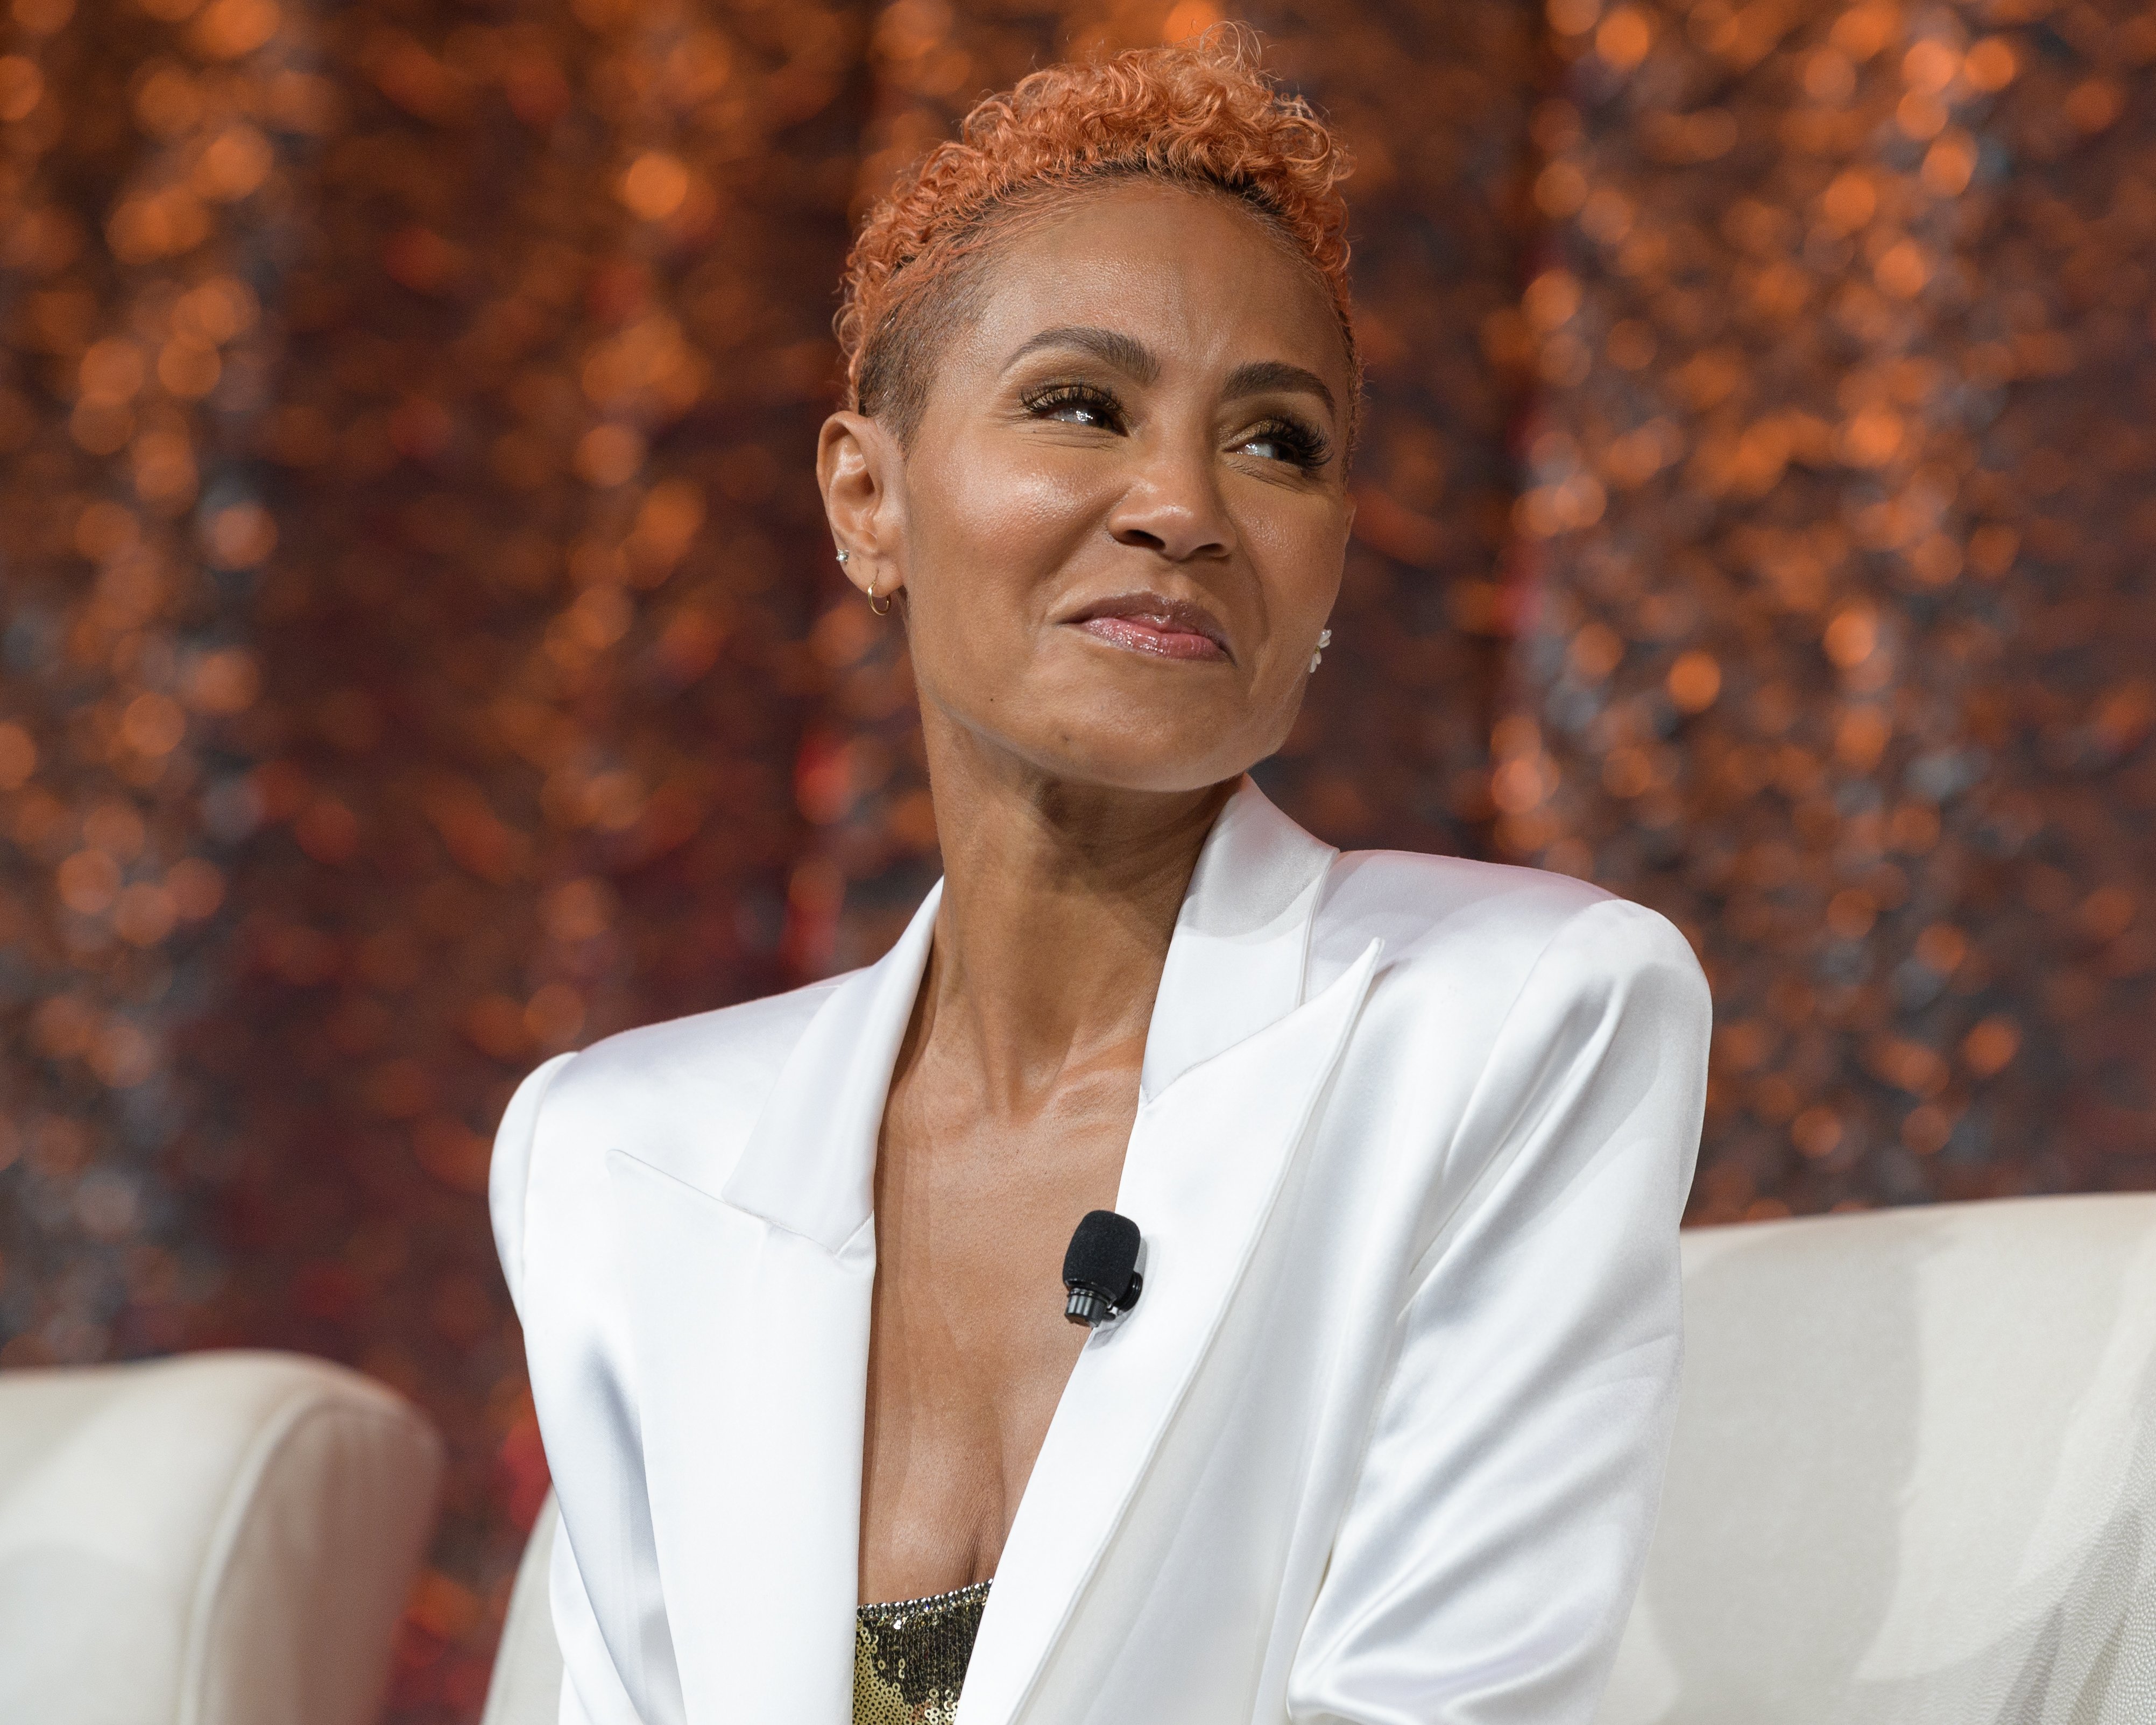 Jada Pinkett Smith during the NATPE Miami 2020 - Facebook on January 22, 2020 in Miami Beach, Florida. | Photo: Getty Images